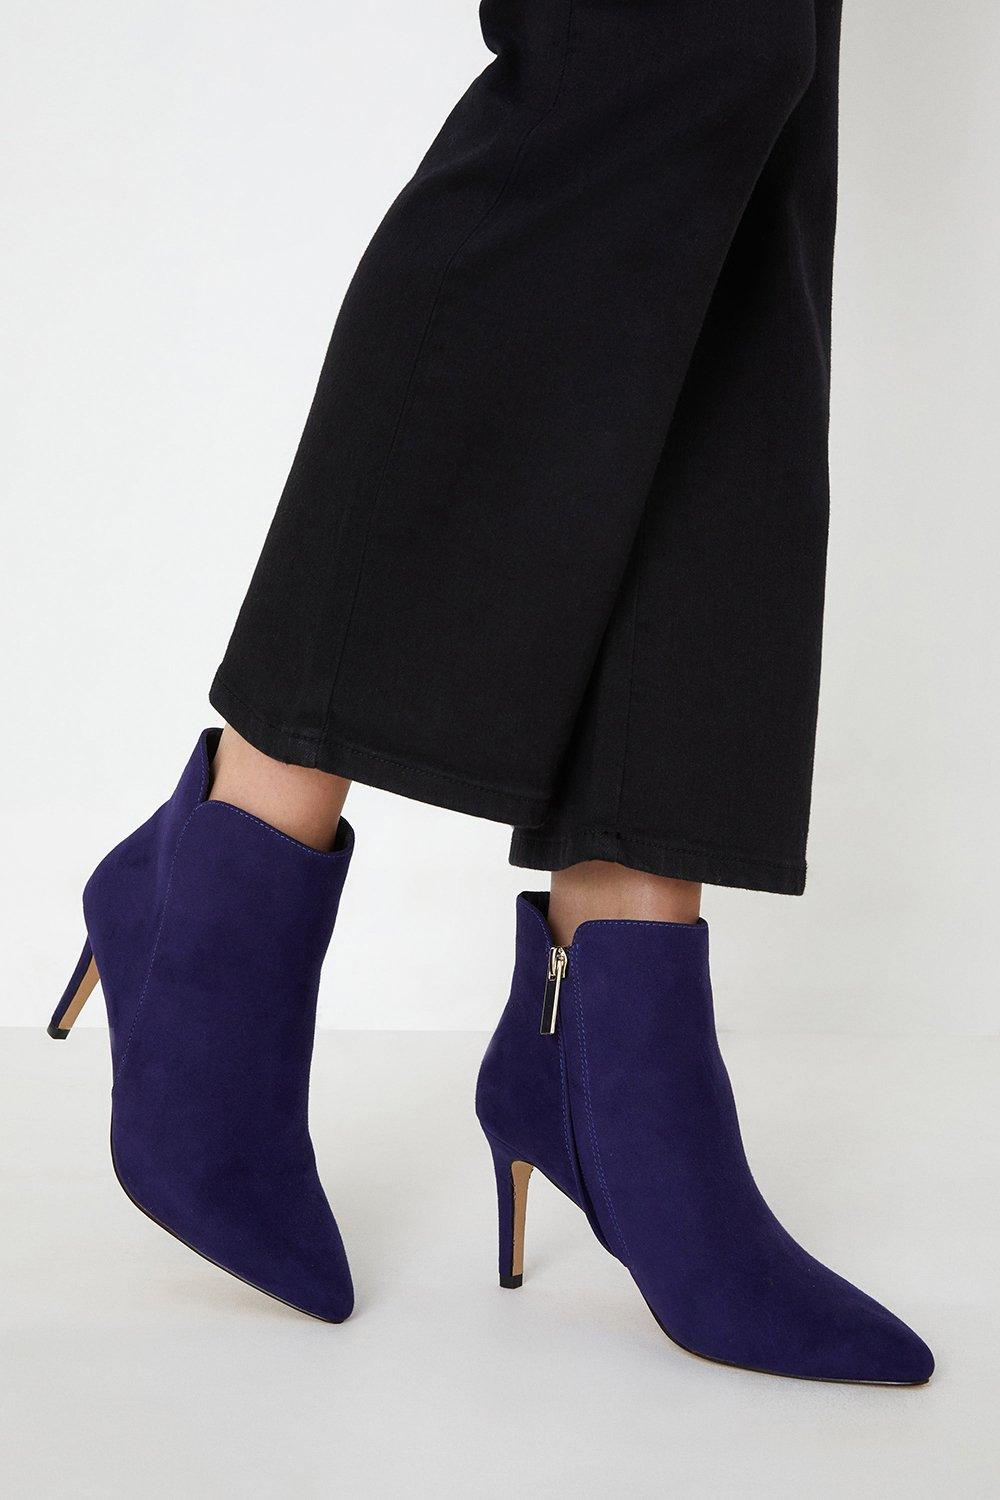 Womens Adore Stiletto Ankle Boots